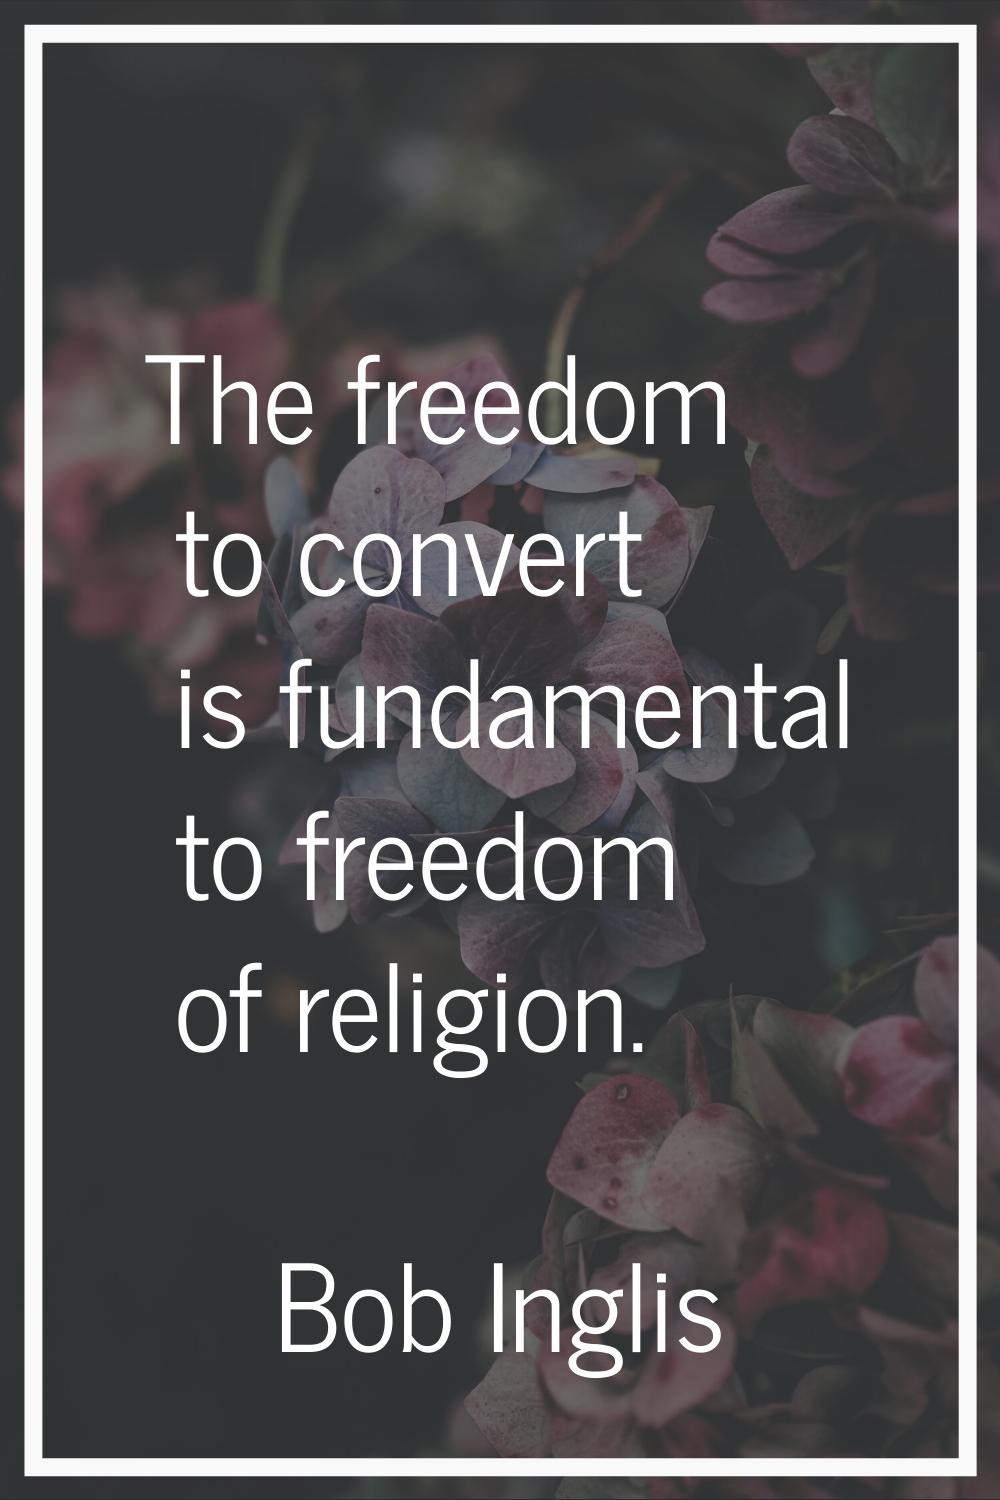 The freedom to convert is fundamental to freedom of religion.